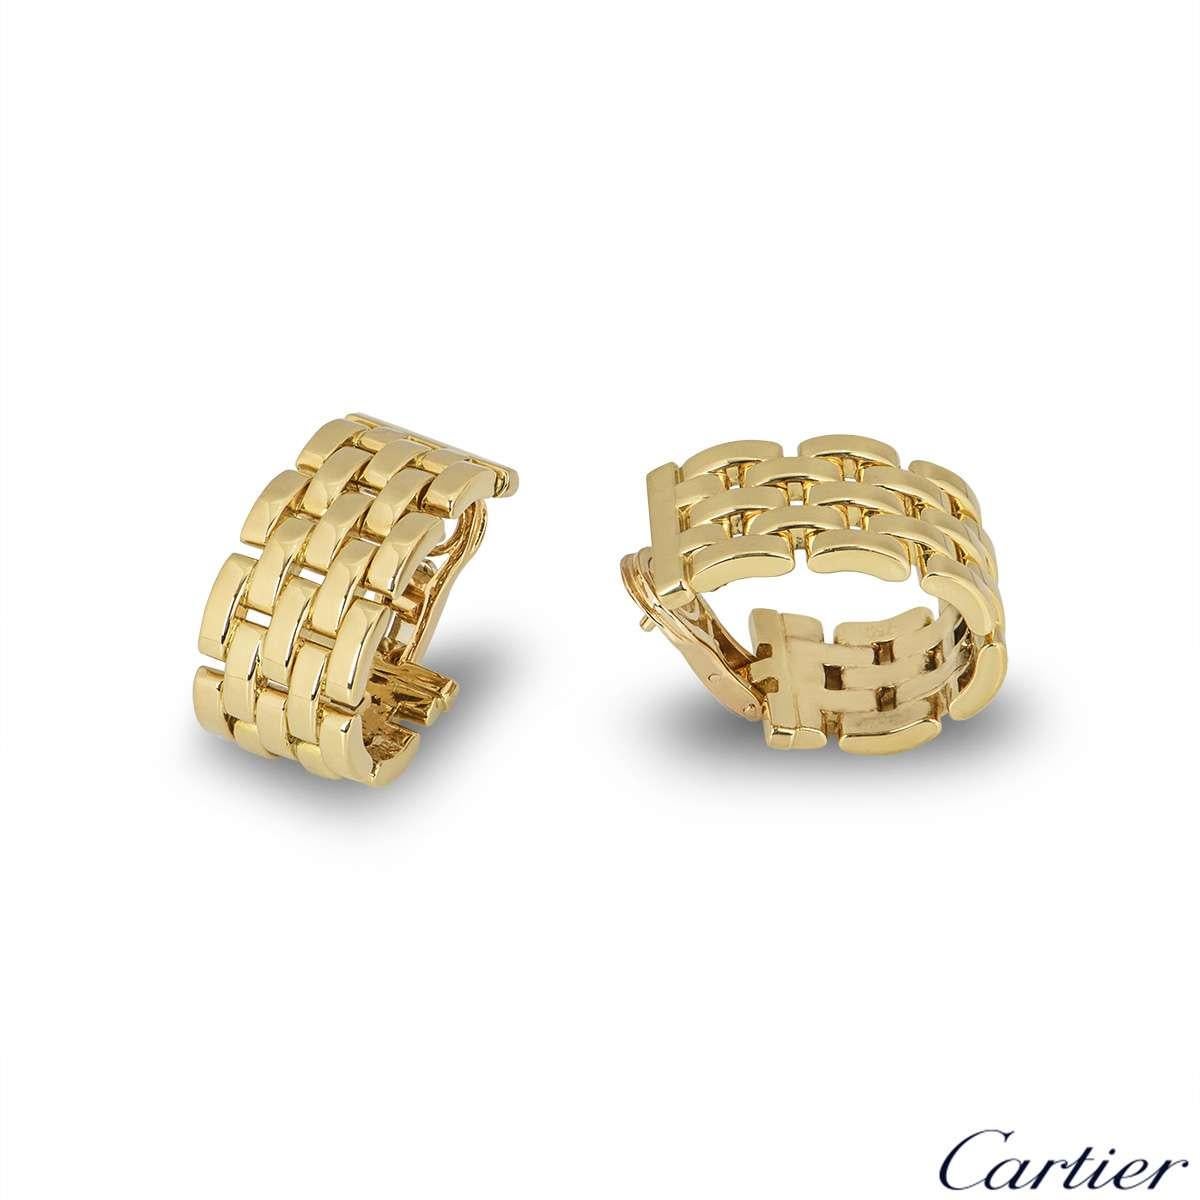 A pair of 18k yellow gold earrings from the Maillon Panthere collection by Cartier. The earrings are composed of five rows of iconic flat links in a half hoop design. The earrings measure 1.2cm in width and 2.5cm in length. The earrings feature post